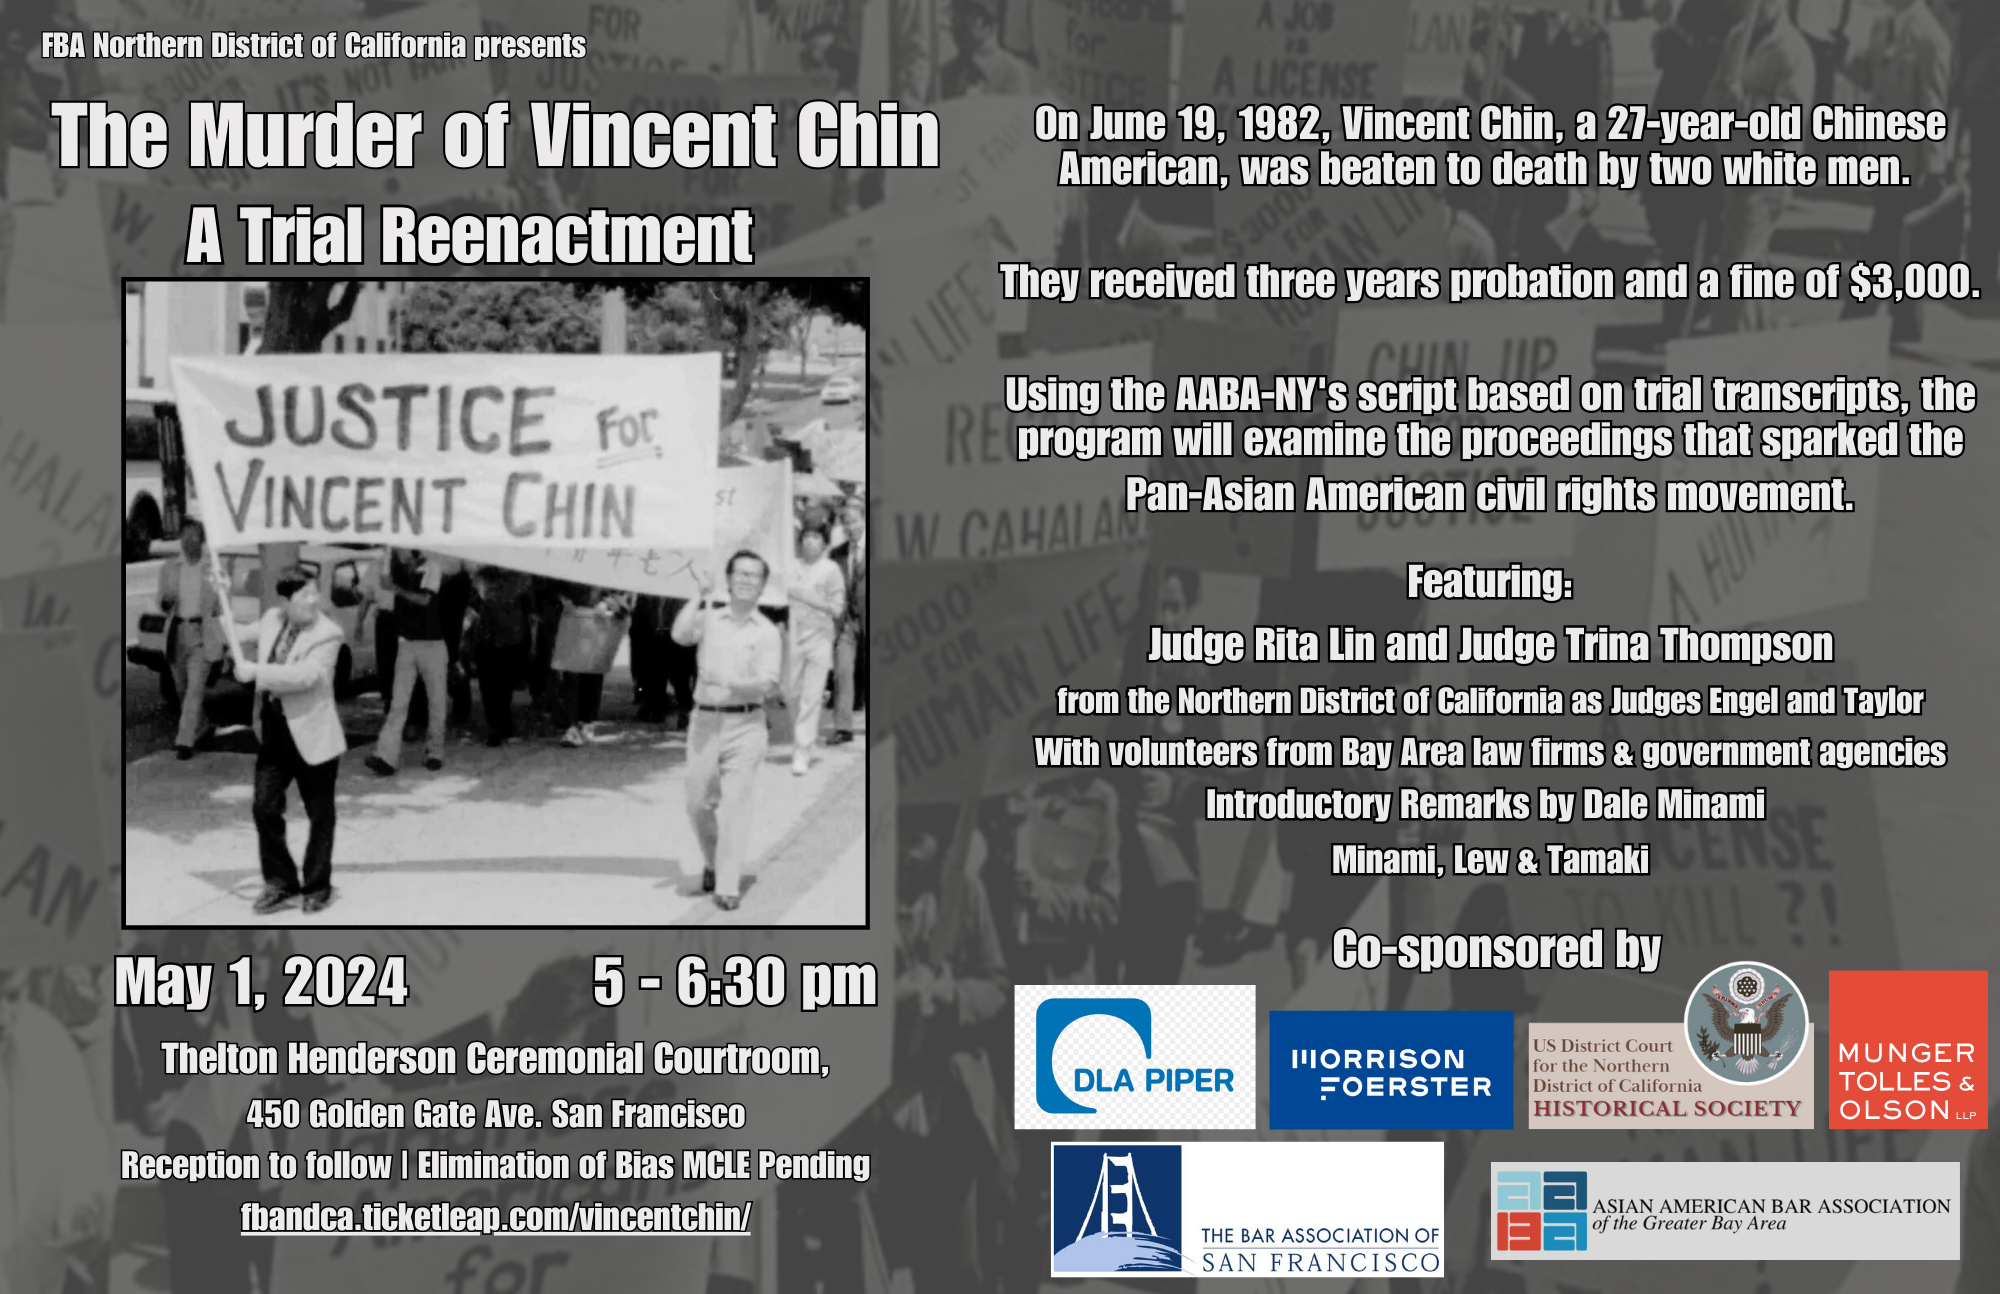 Pictured: Flyer for The Murder Trial of Vincent Chin: A Trial Reenactment